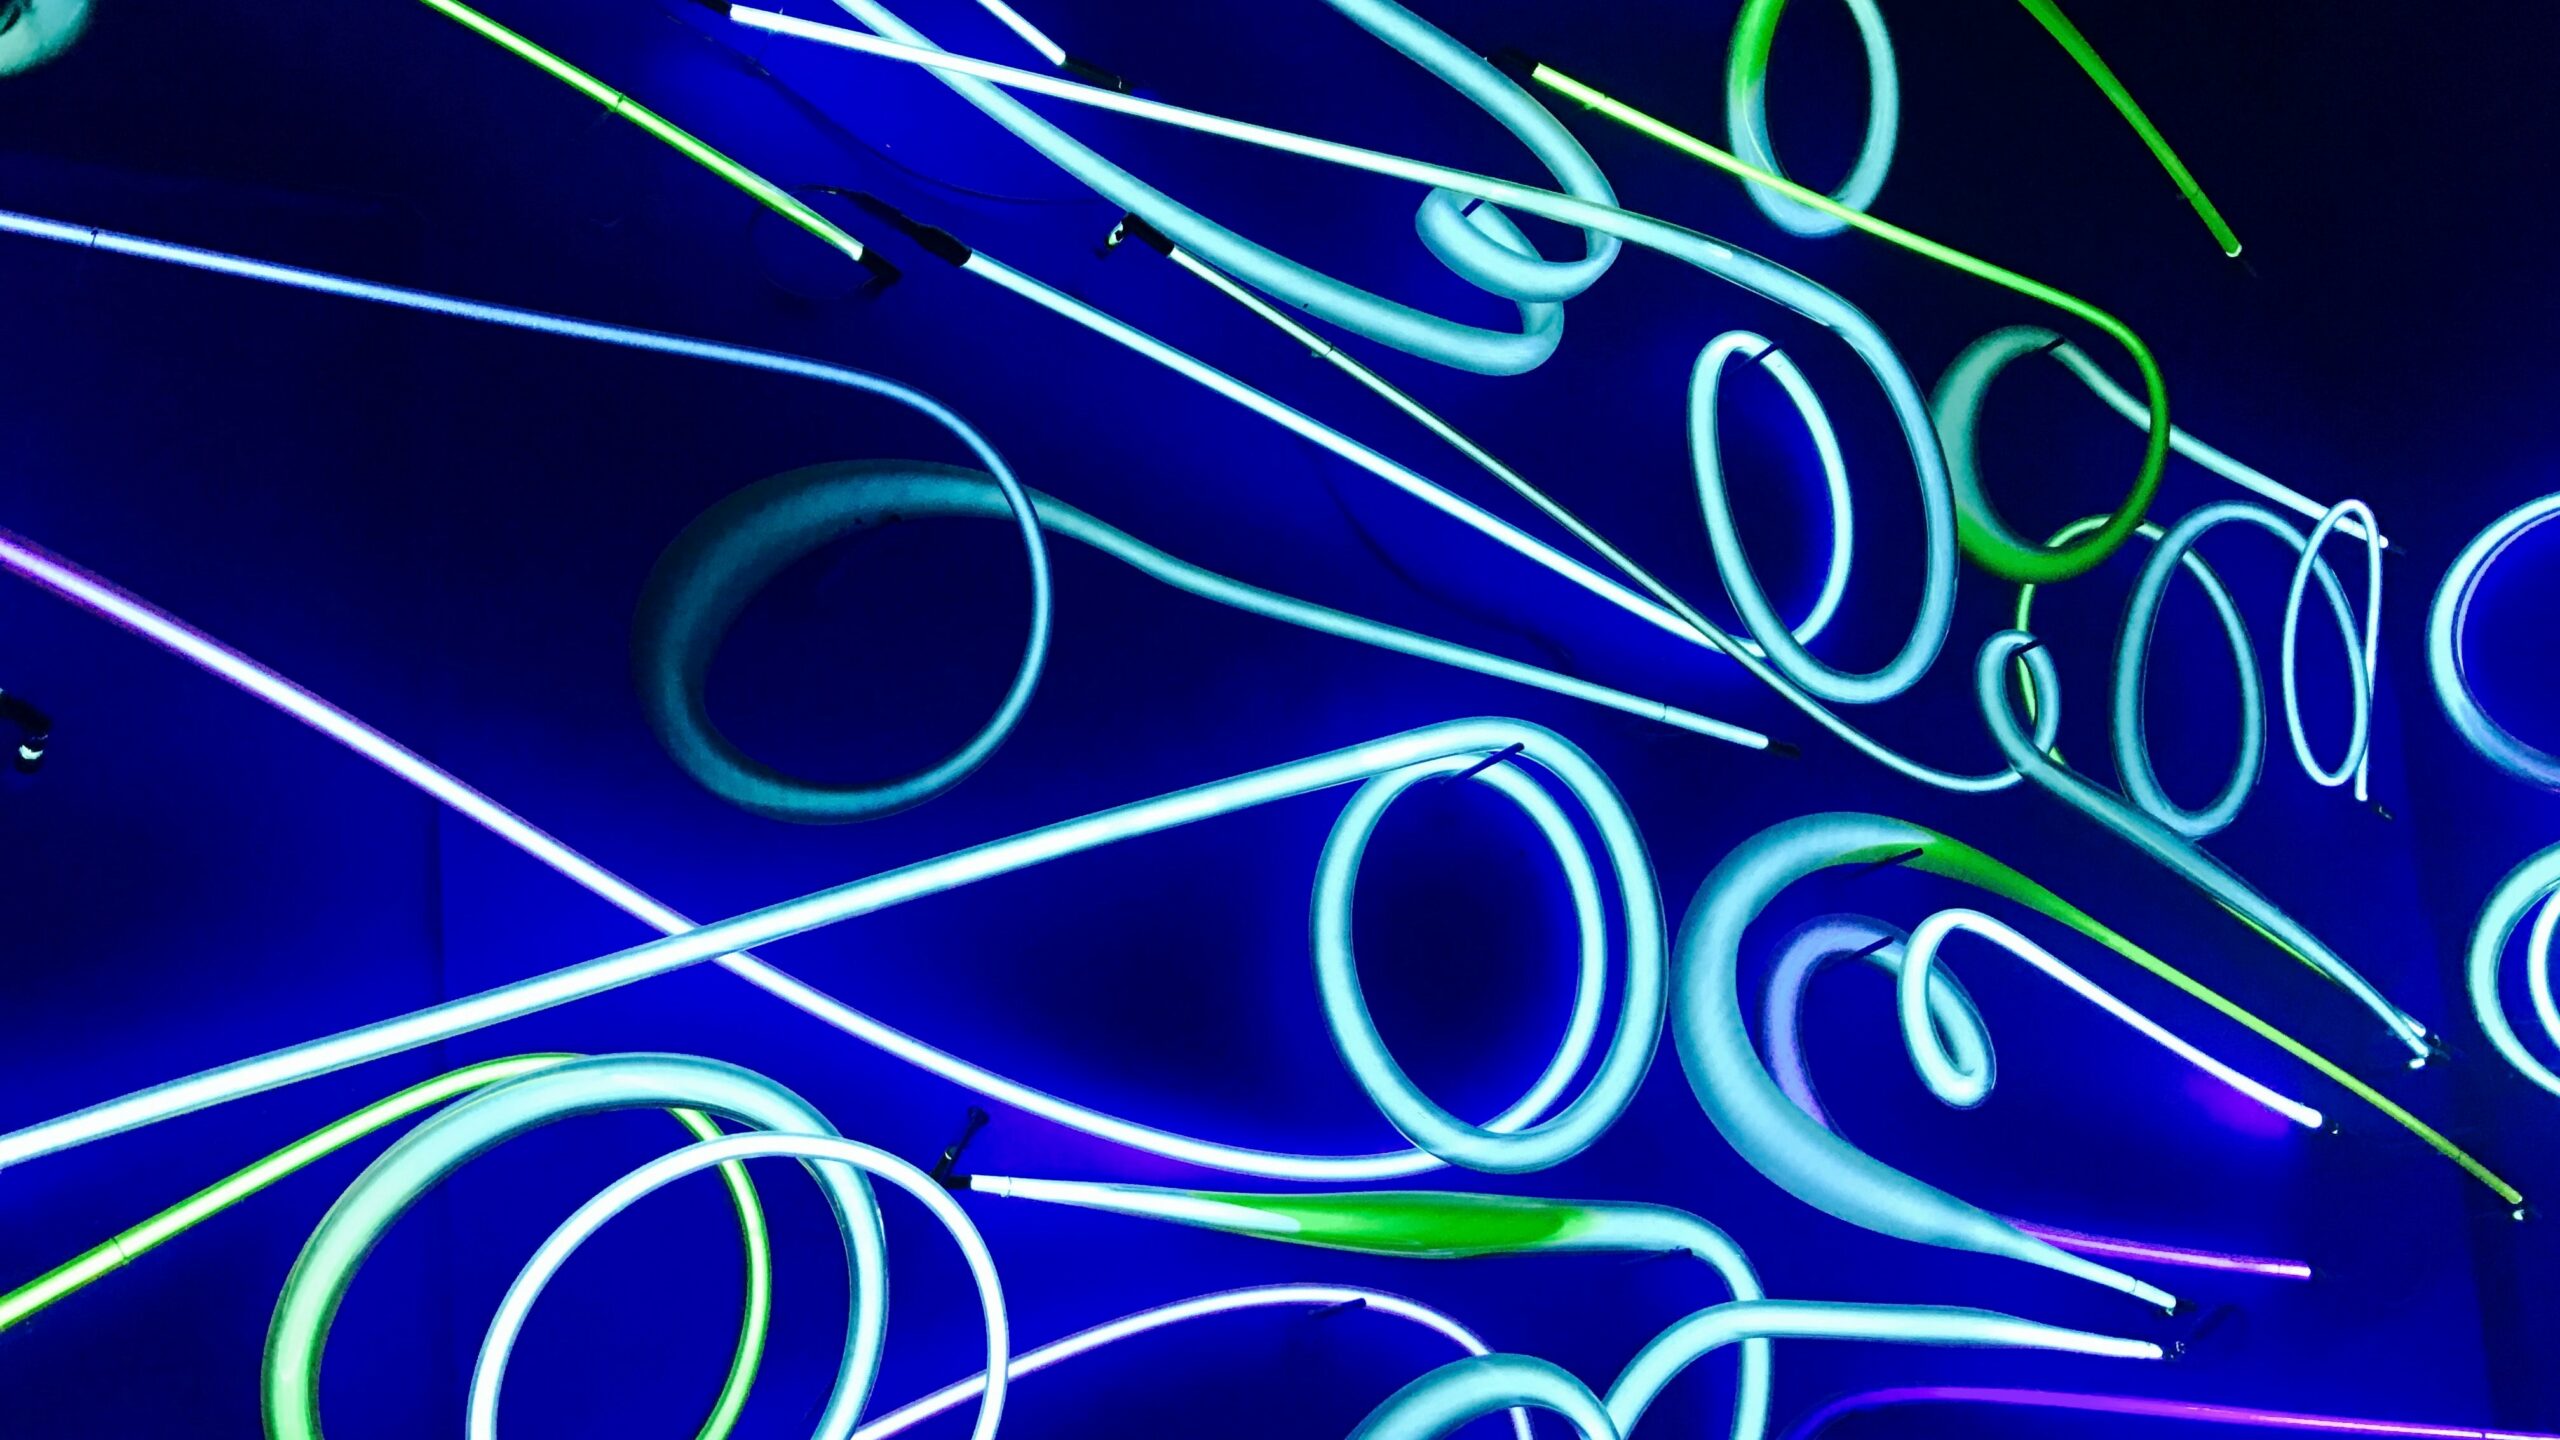 Abstract neon lights in swirling shapes